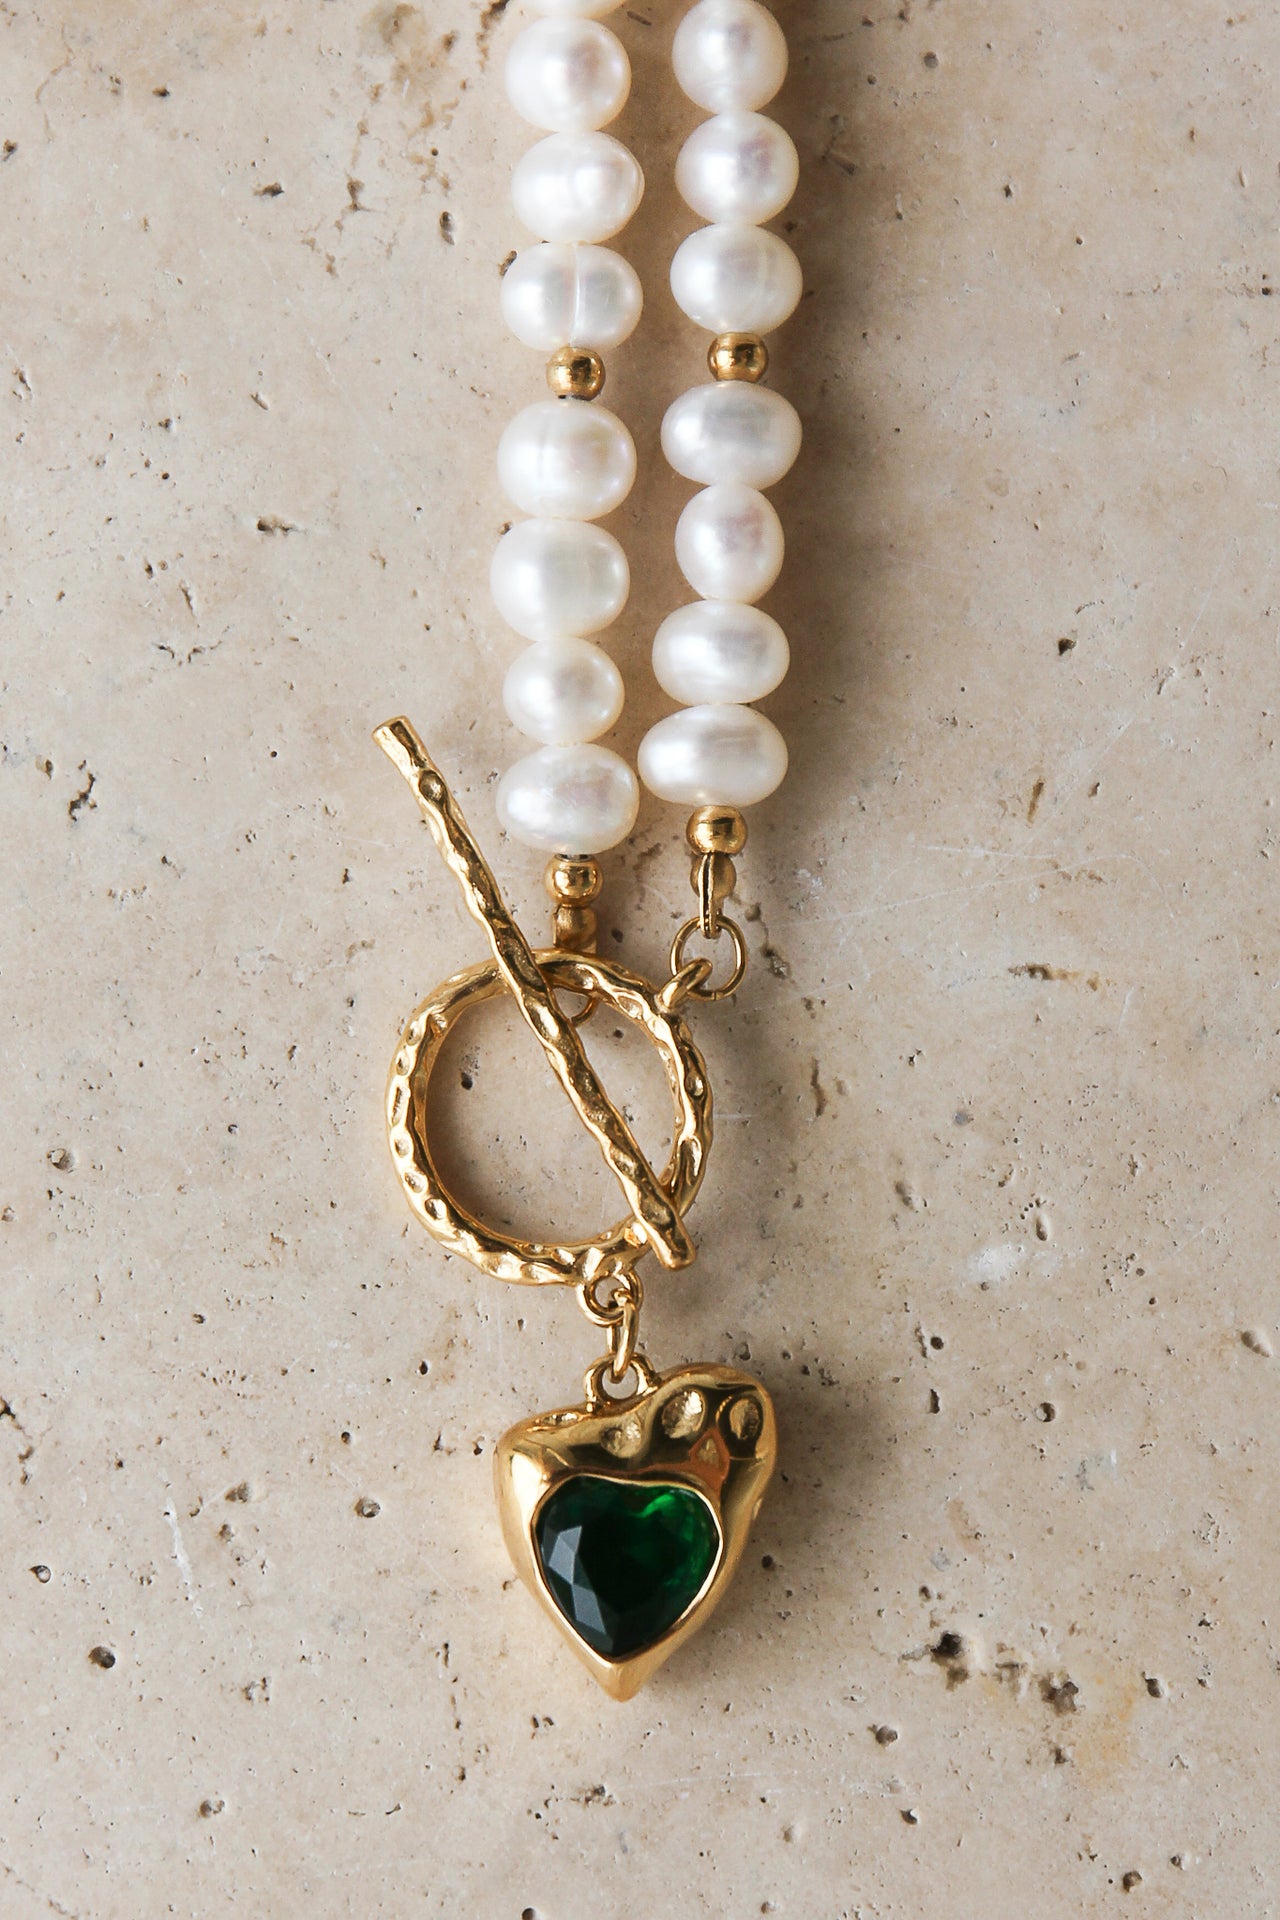 GOLD HEART FRESH WATER PEARL NECKLACE GREEN STONE